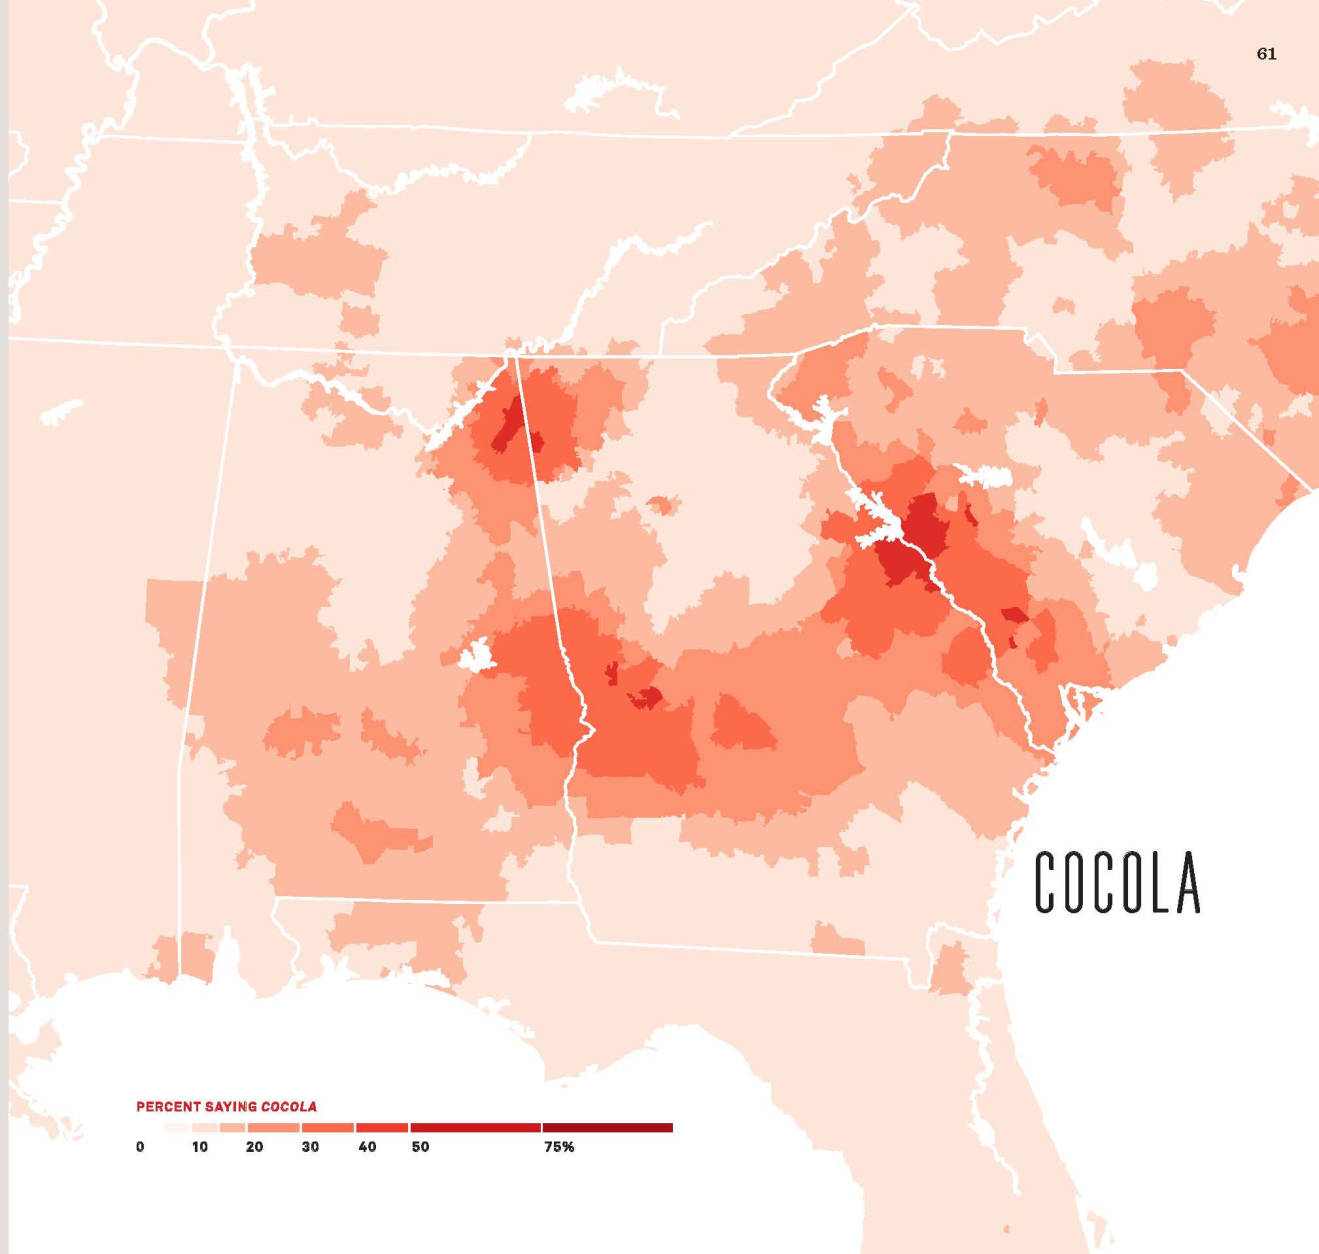 And then there's "Cocola." (Maps excerpted from SPEAKING AMERICAN: How Y’all, Youse , and You Guys Talk: A Visual Guide by Josh Katz. Copyright © 2016 by Josh Katz. Reprinted by permission of Houghton Mifflin Harcourt Publishing Company. All rights reserved).